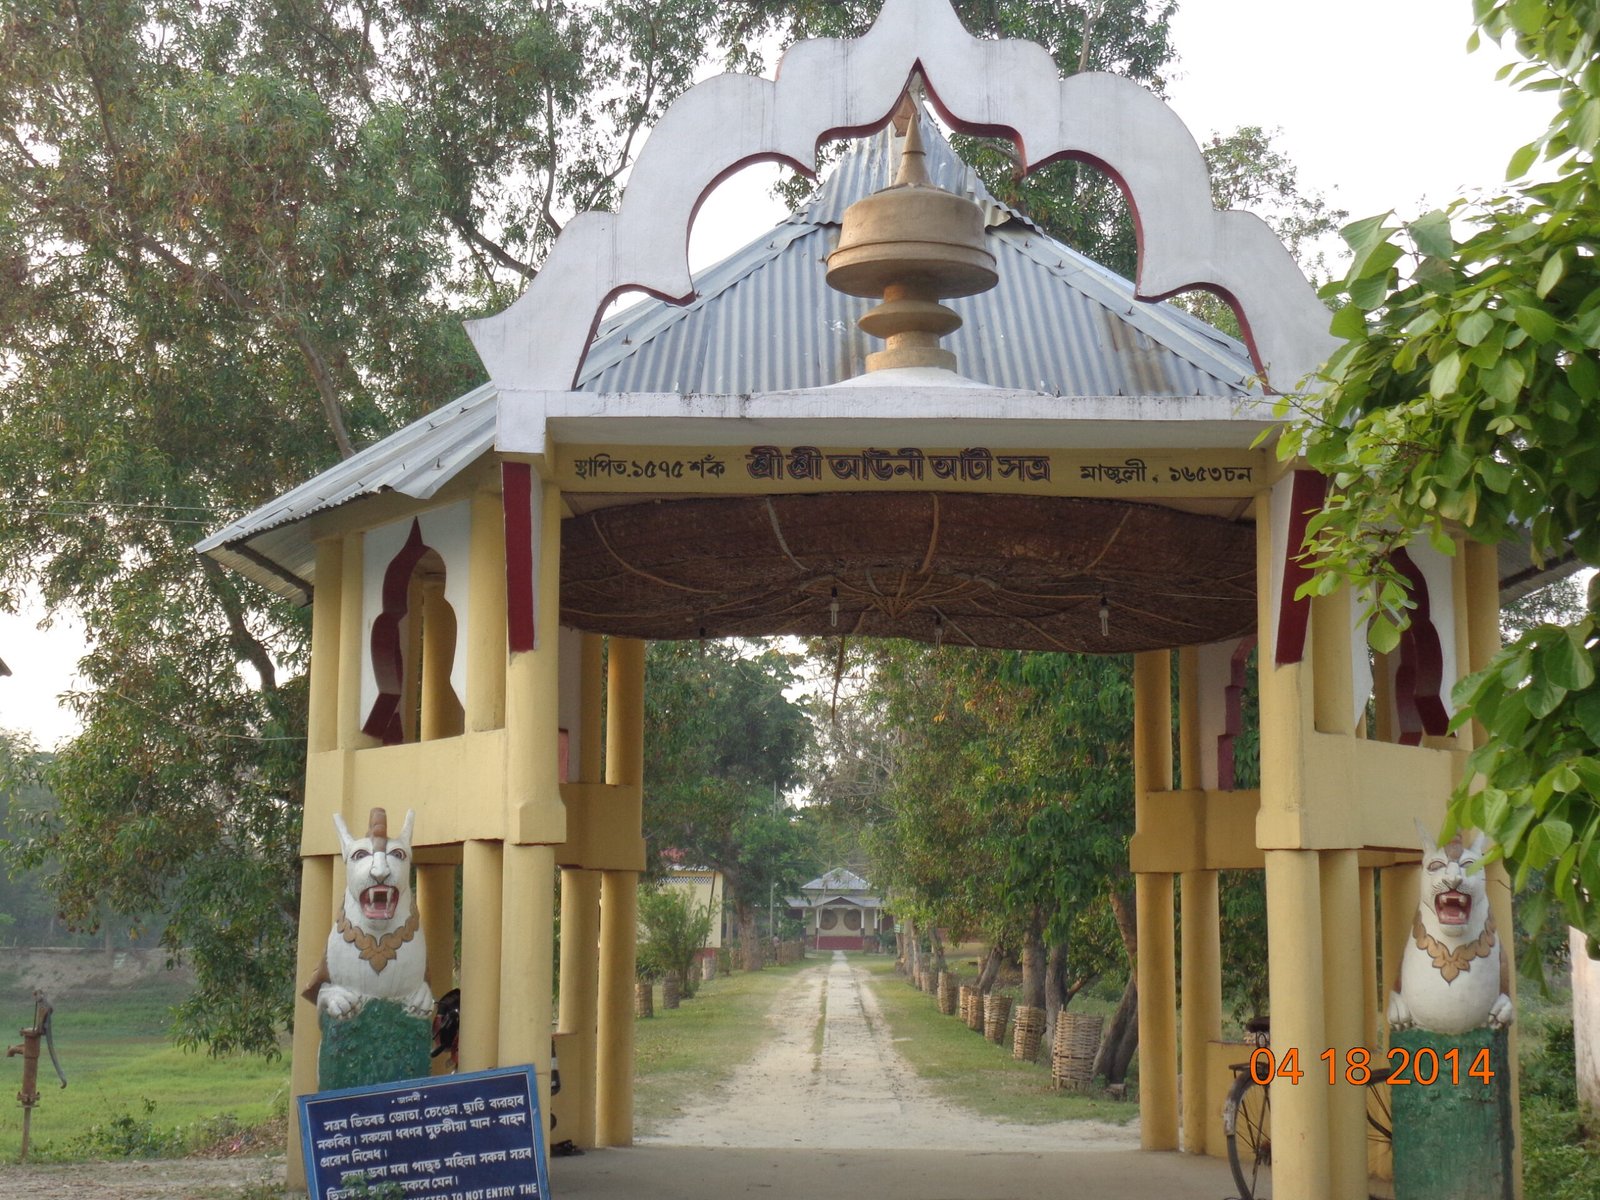 A picture of the Gate of Auniati Satra